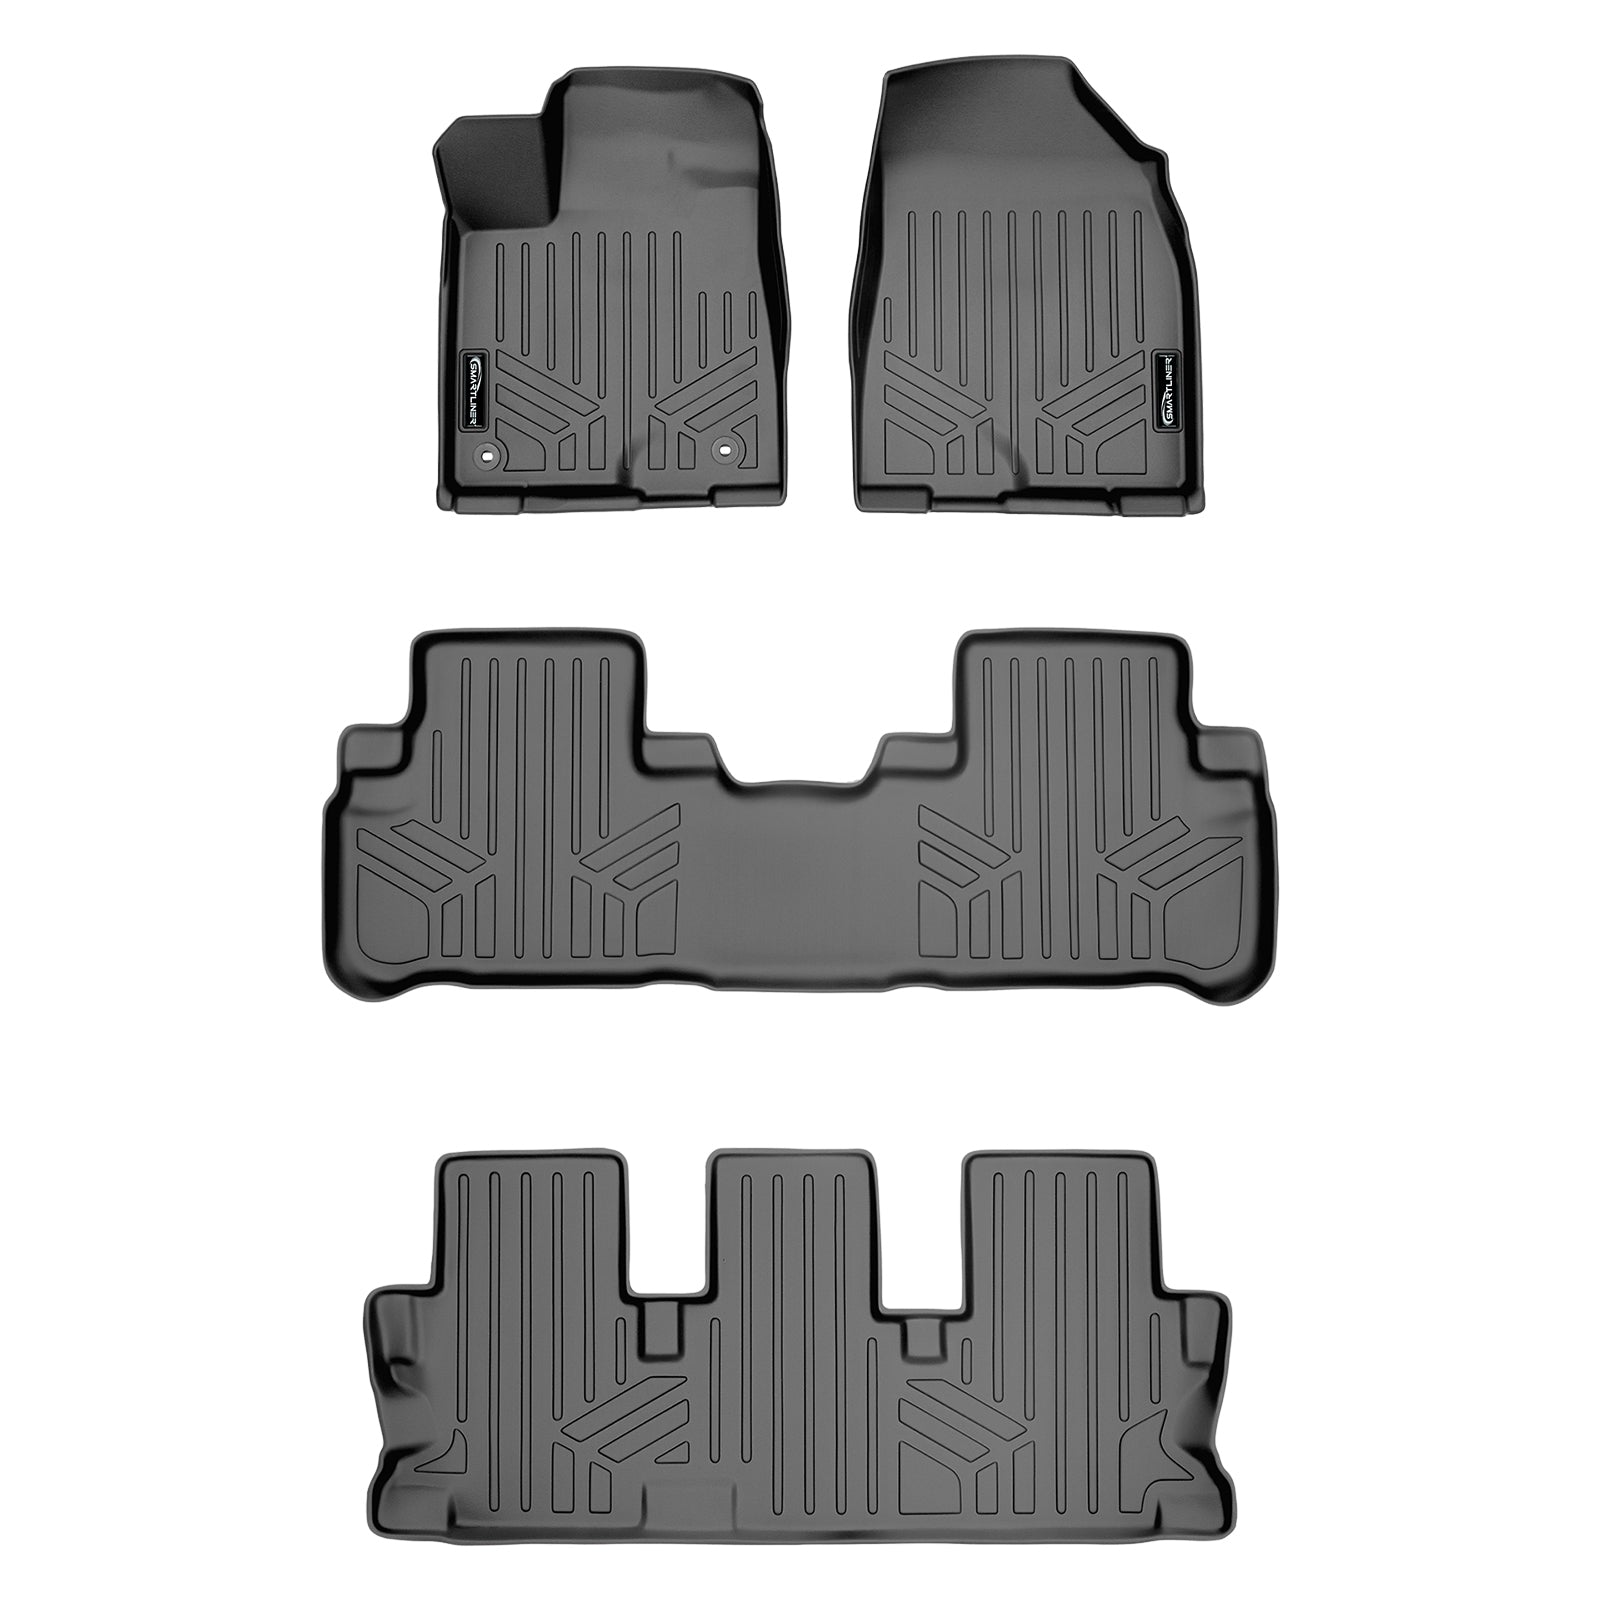 SMARTLINER Custom Fit Floor Liners For 2014-2019 Toyota Highlander (with 2nd Row Bench Seat)